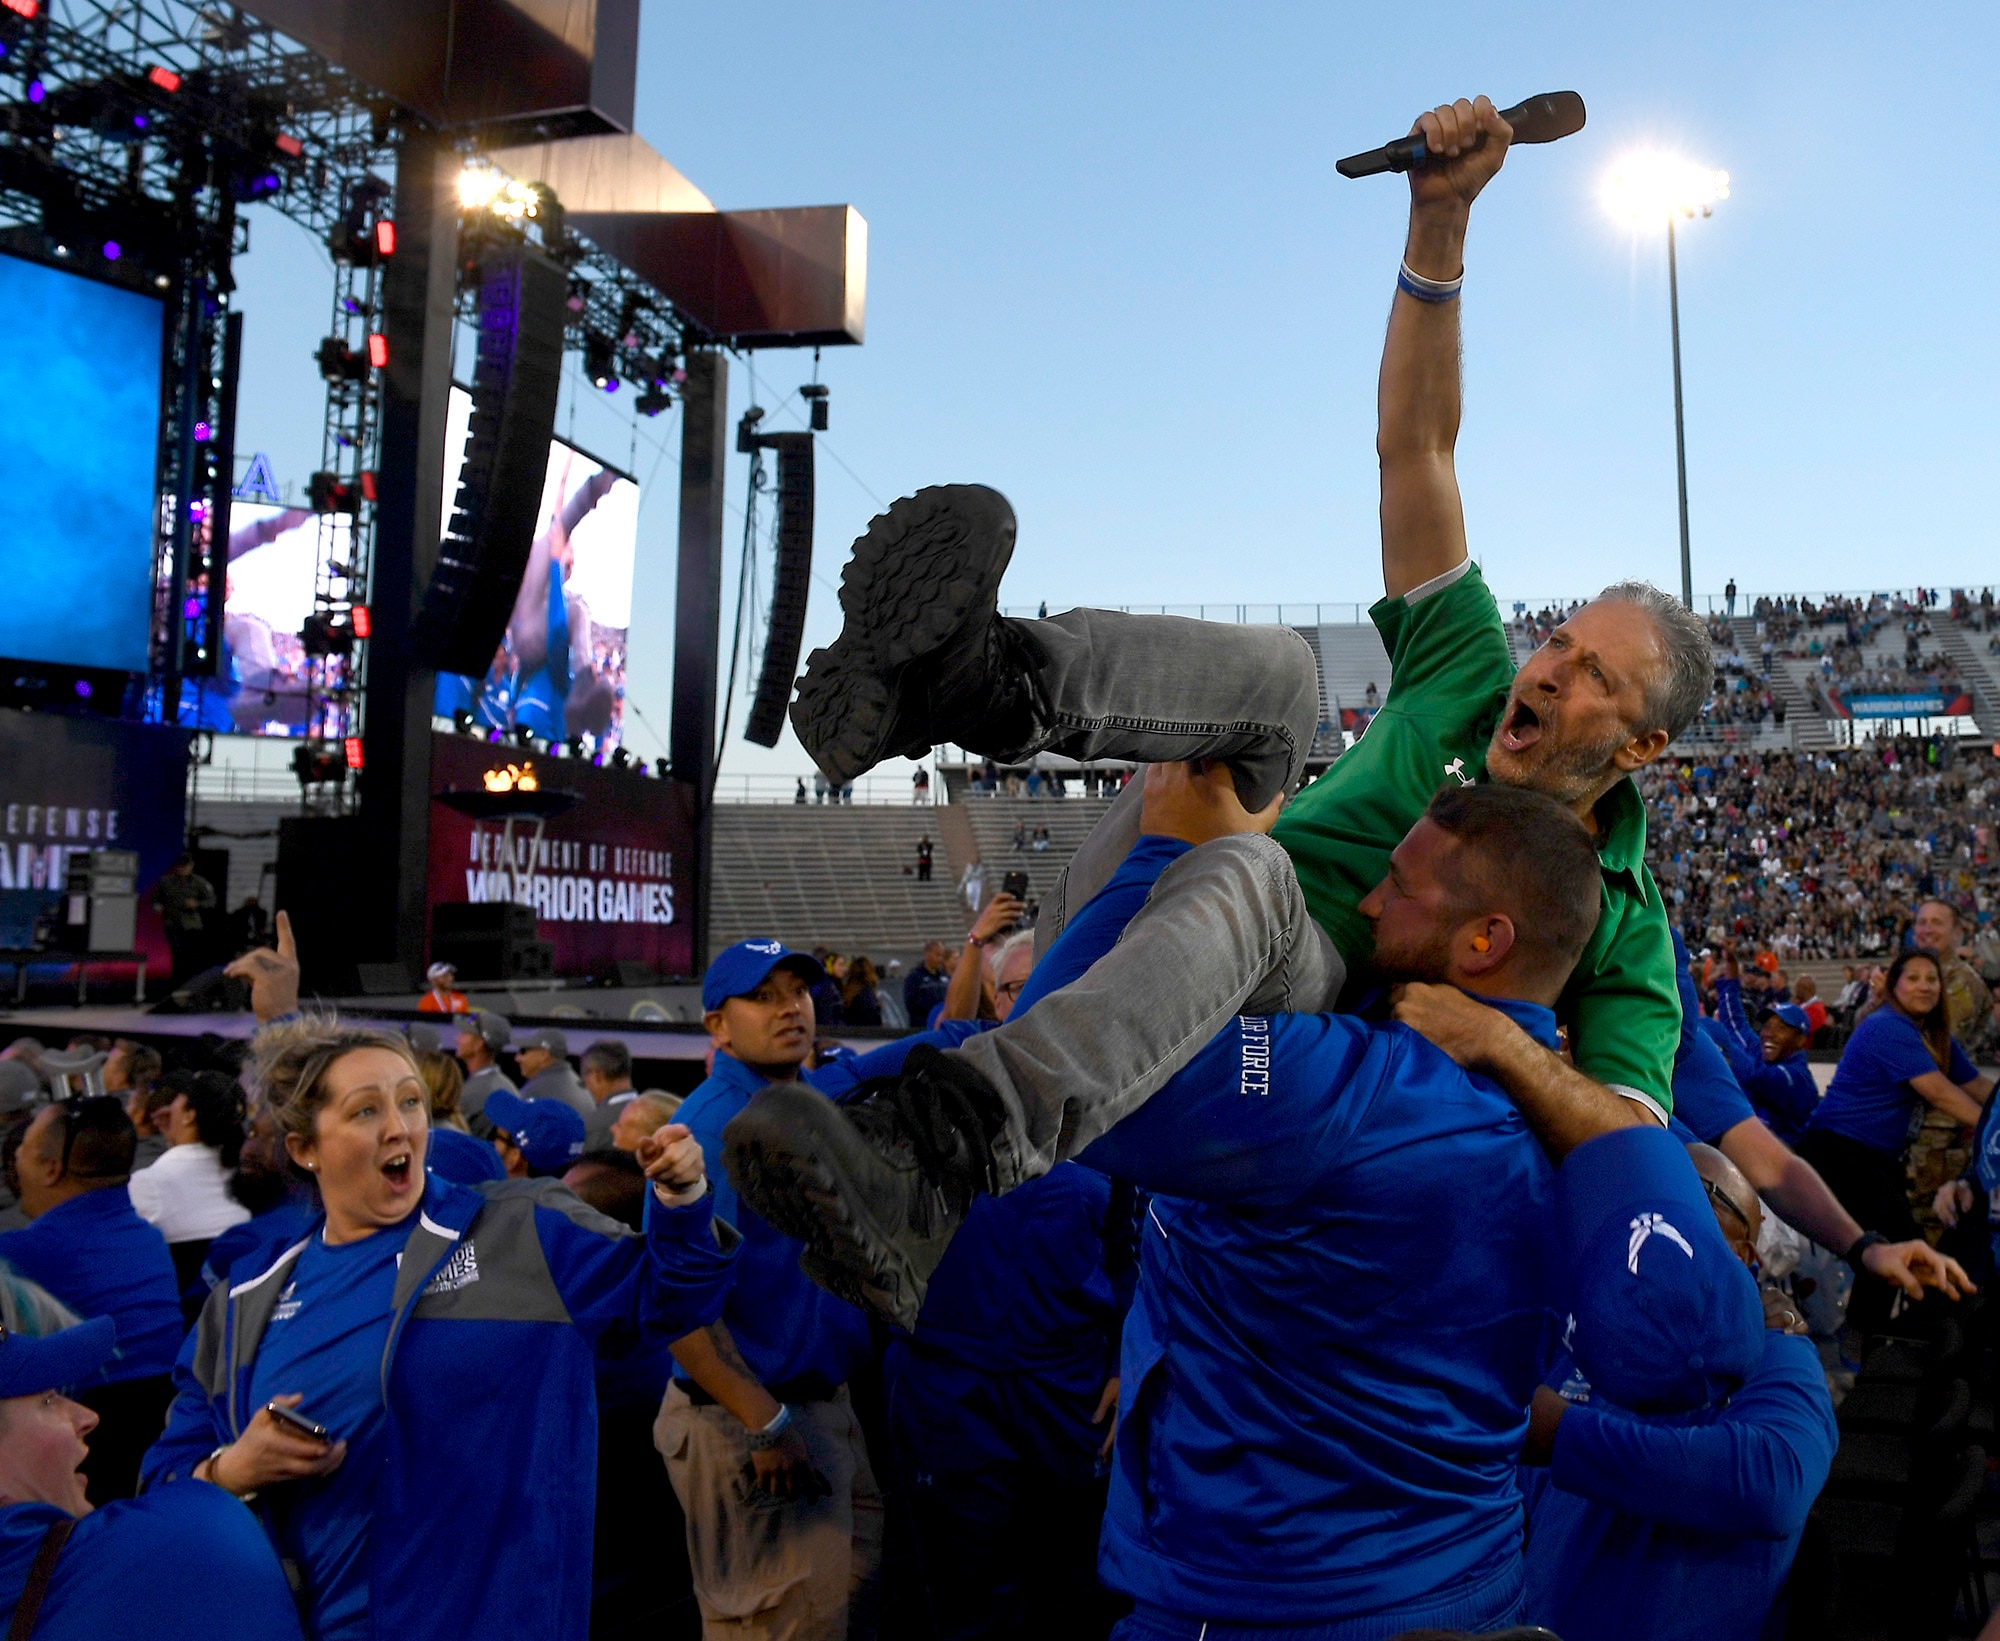 Actor and television personality Jon Stewart is hoisted up in the air by members of Team Air Force during the opening ceremony of the Department of Defense Warrior Games at the U.S. Air Force Academy in Colorado Springs, Colorado, June 2, 2018. First held in Colorado Springs in 2010, the Warrior Games were established as a way to expose service members who were wounded, ill or injured to adaptive sports. The Air Force is the host service for this year's Games. (U.S. Air Force photo by Staff Sgt. Rusty Frank)